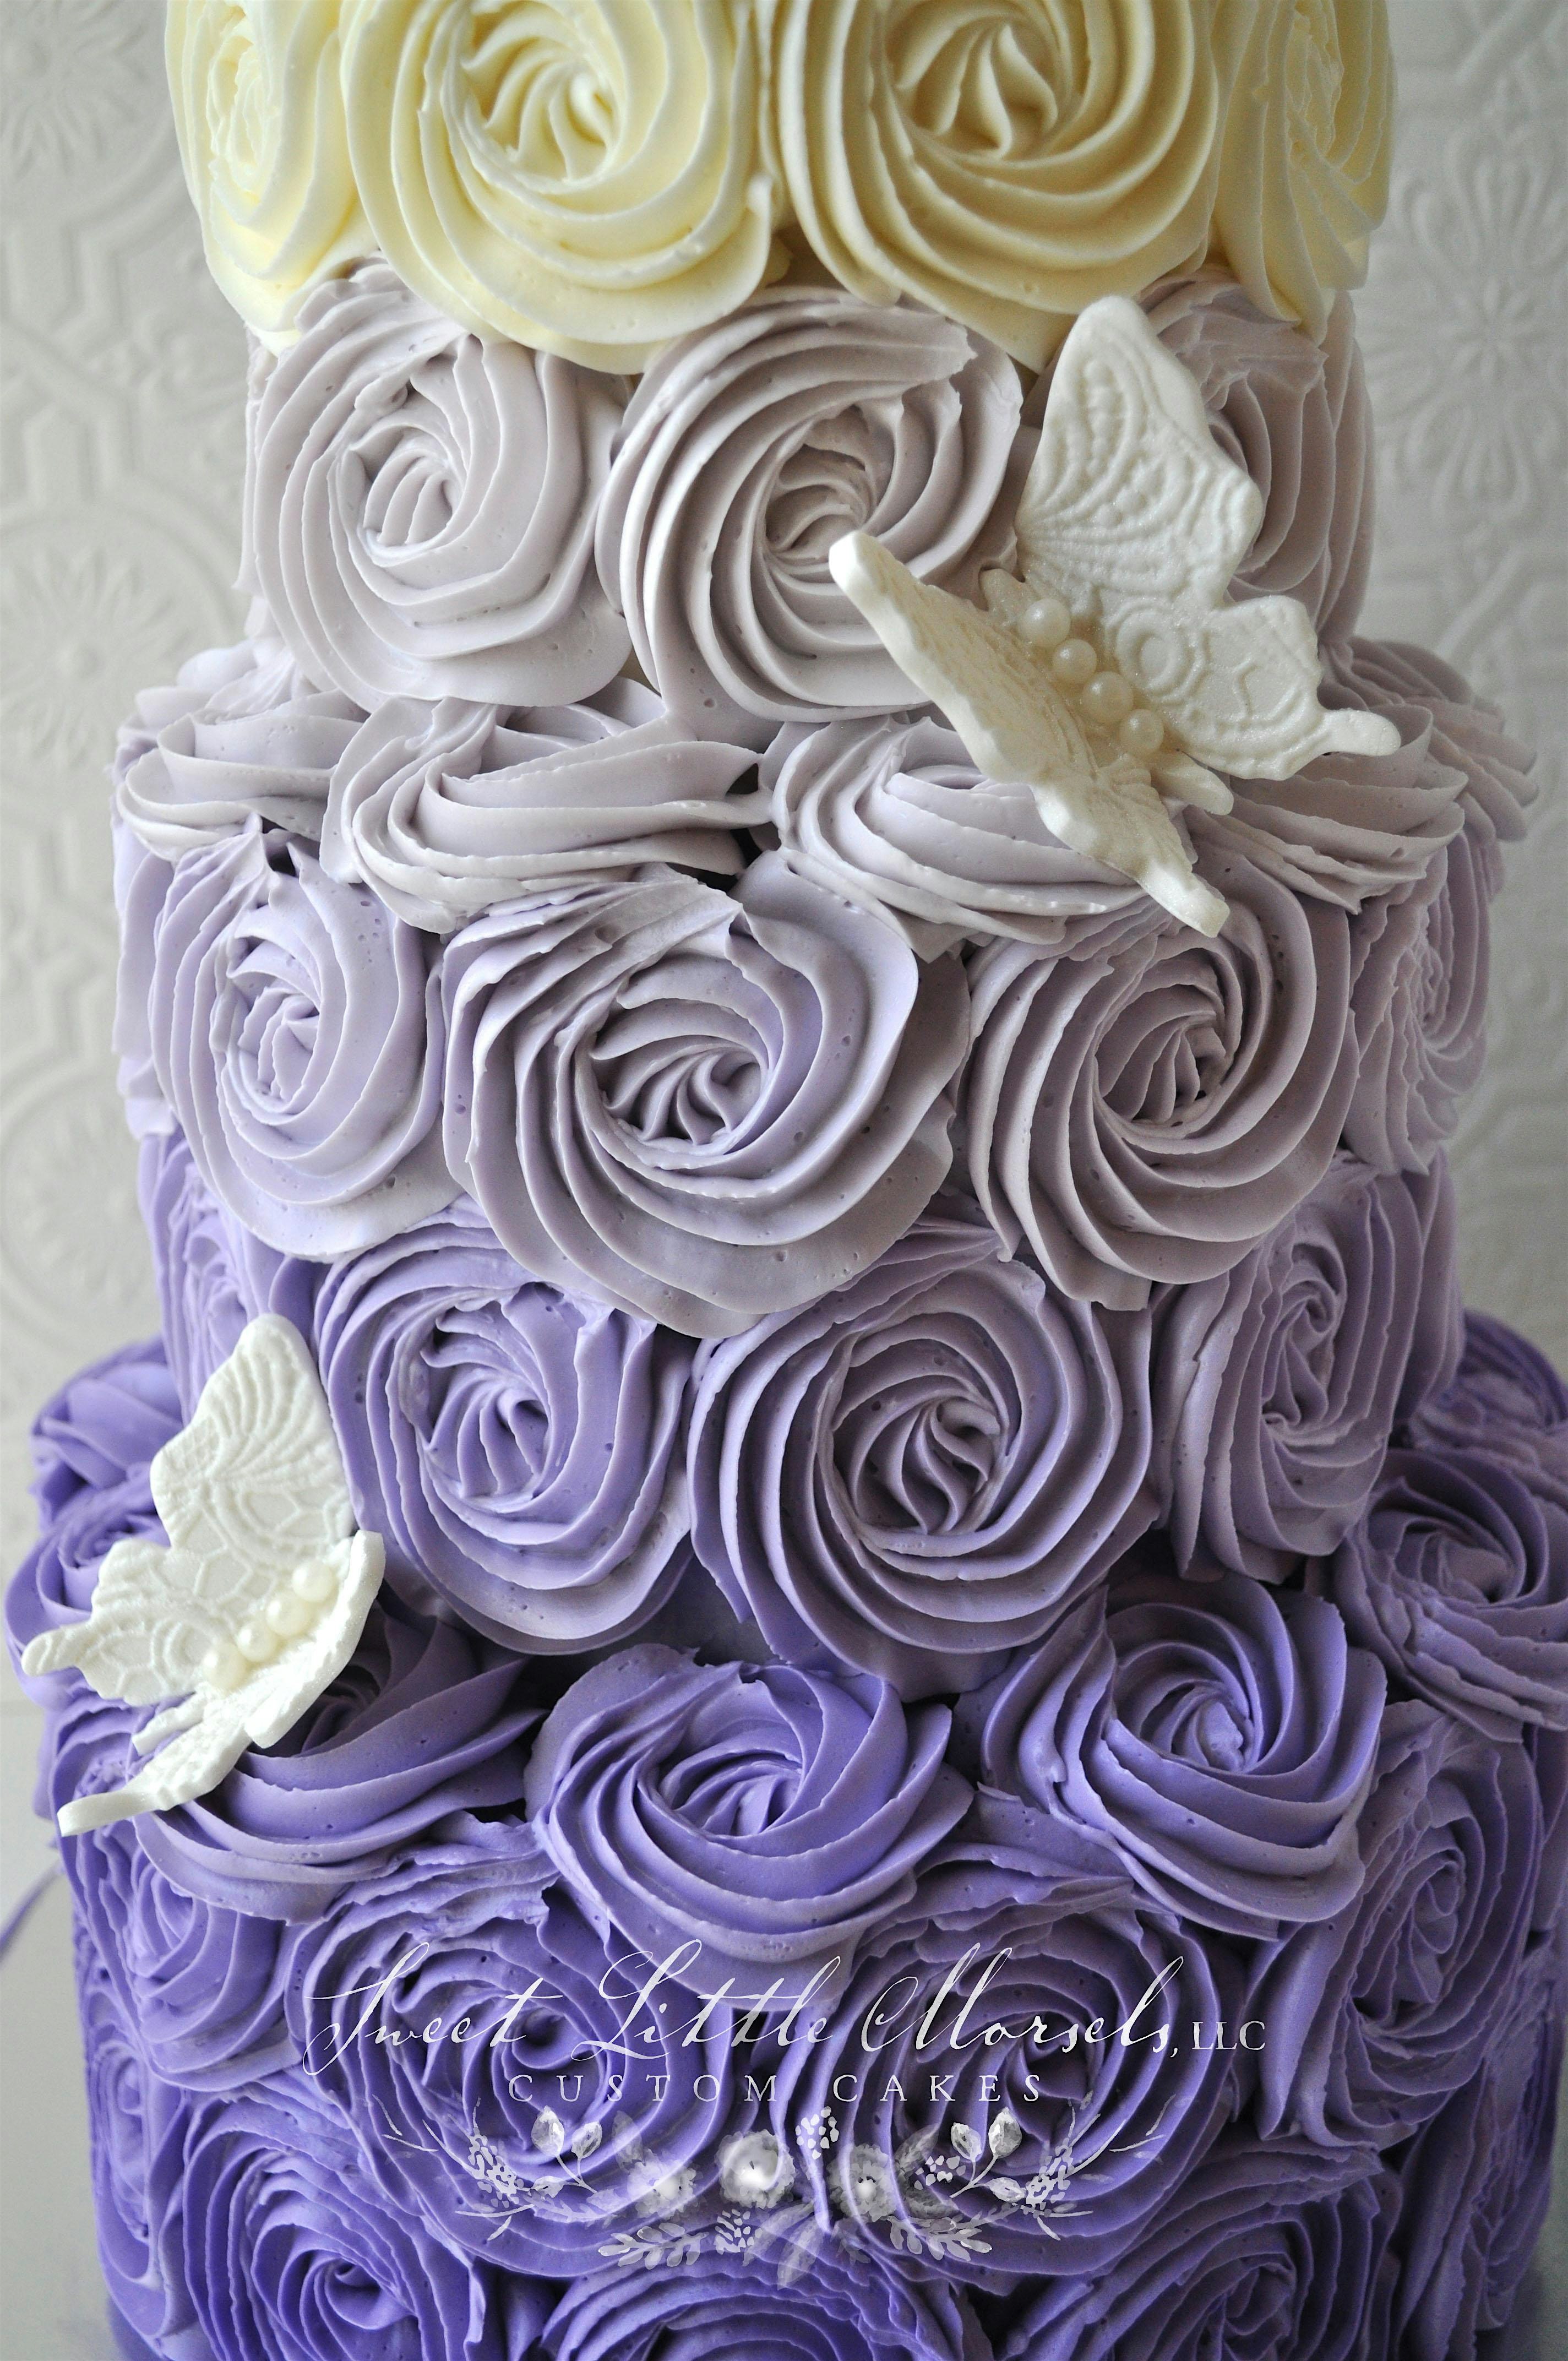 Sharp and Smooth Buttercream Double Barrel Cake with Buttercream Rosettes